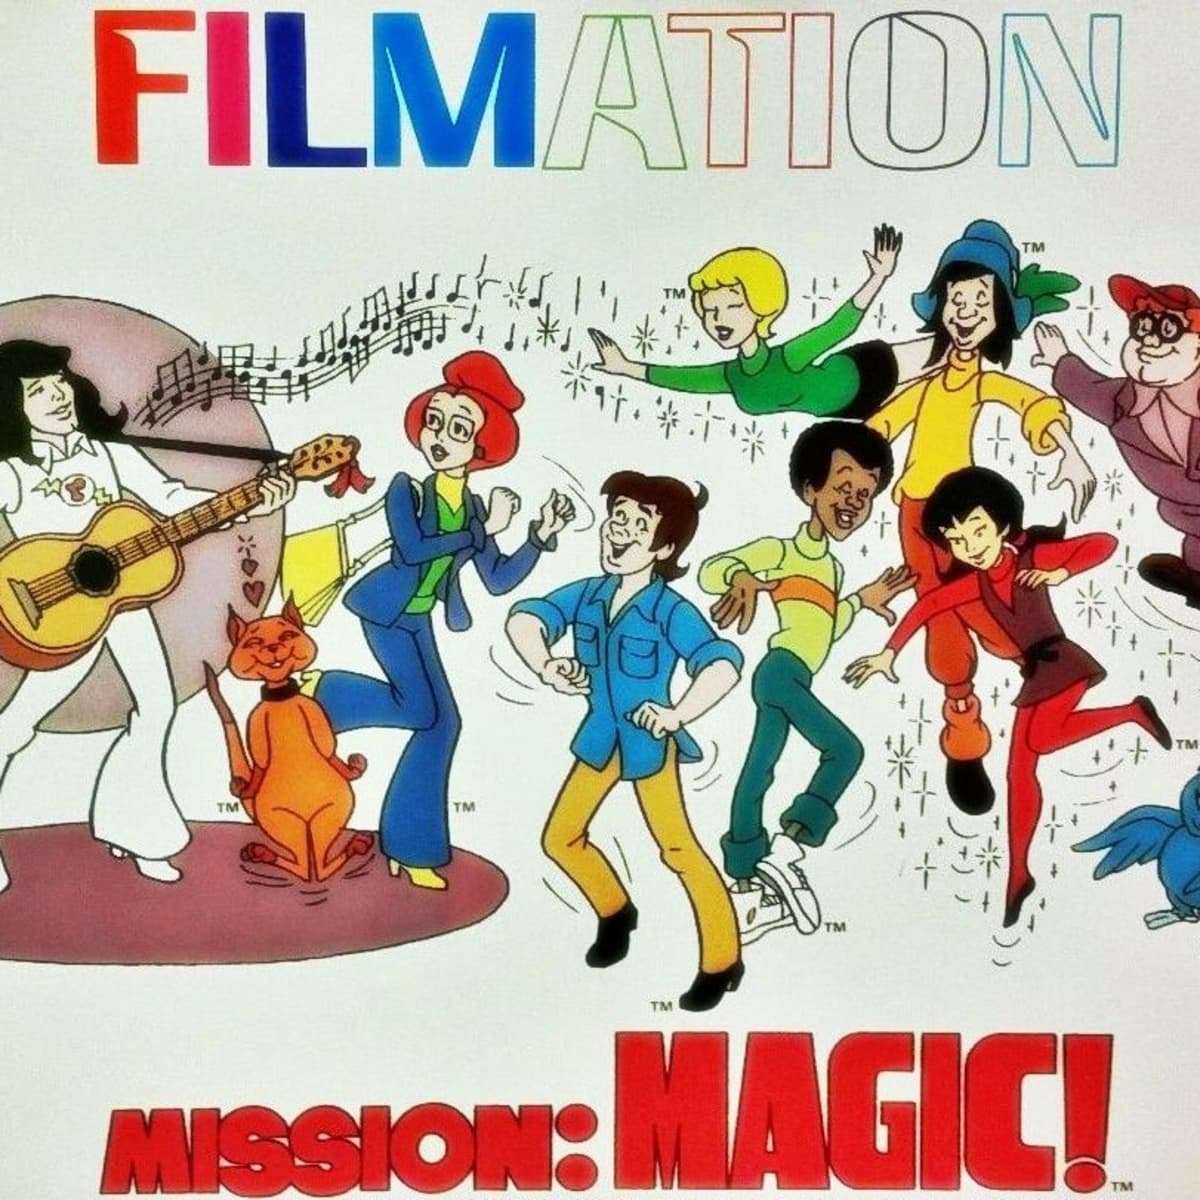 Remembering Mission:Magic! Rick Springfield's Forgotten 1970s Cartoon  Series - HubPages